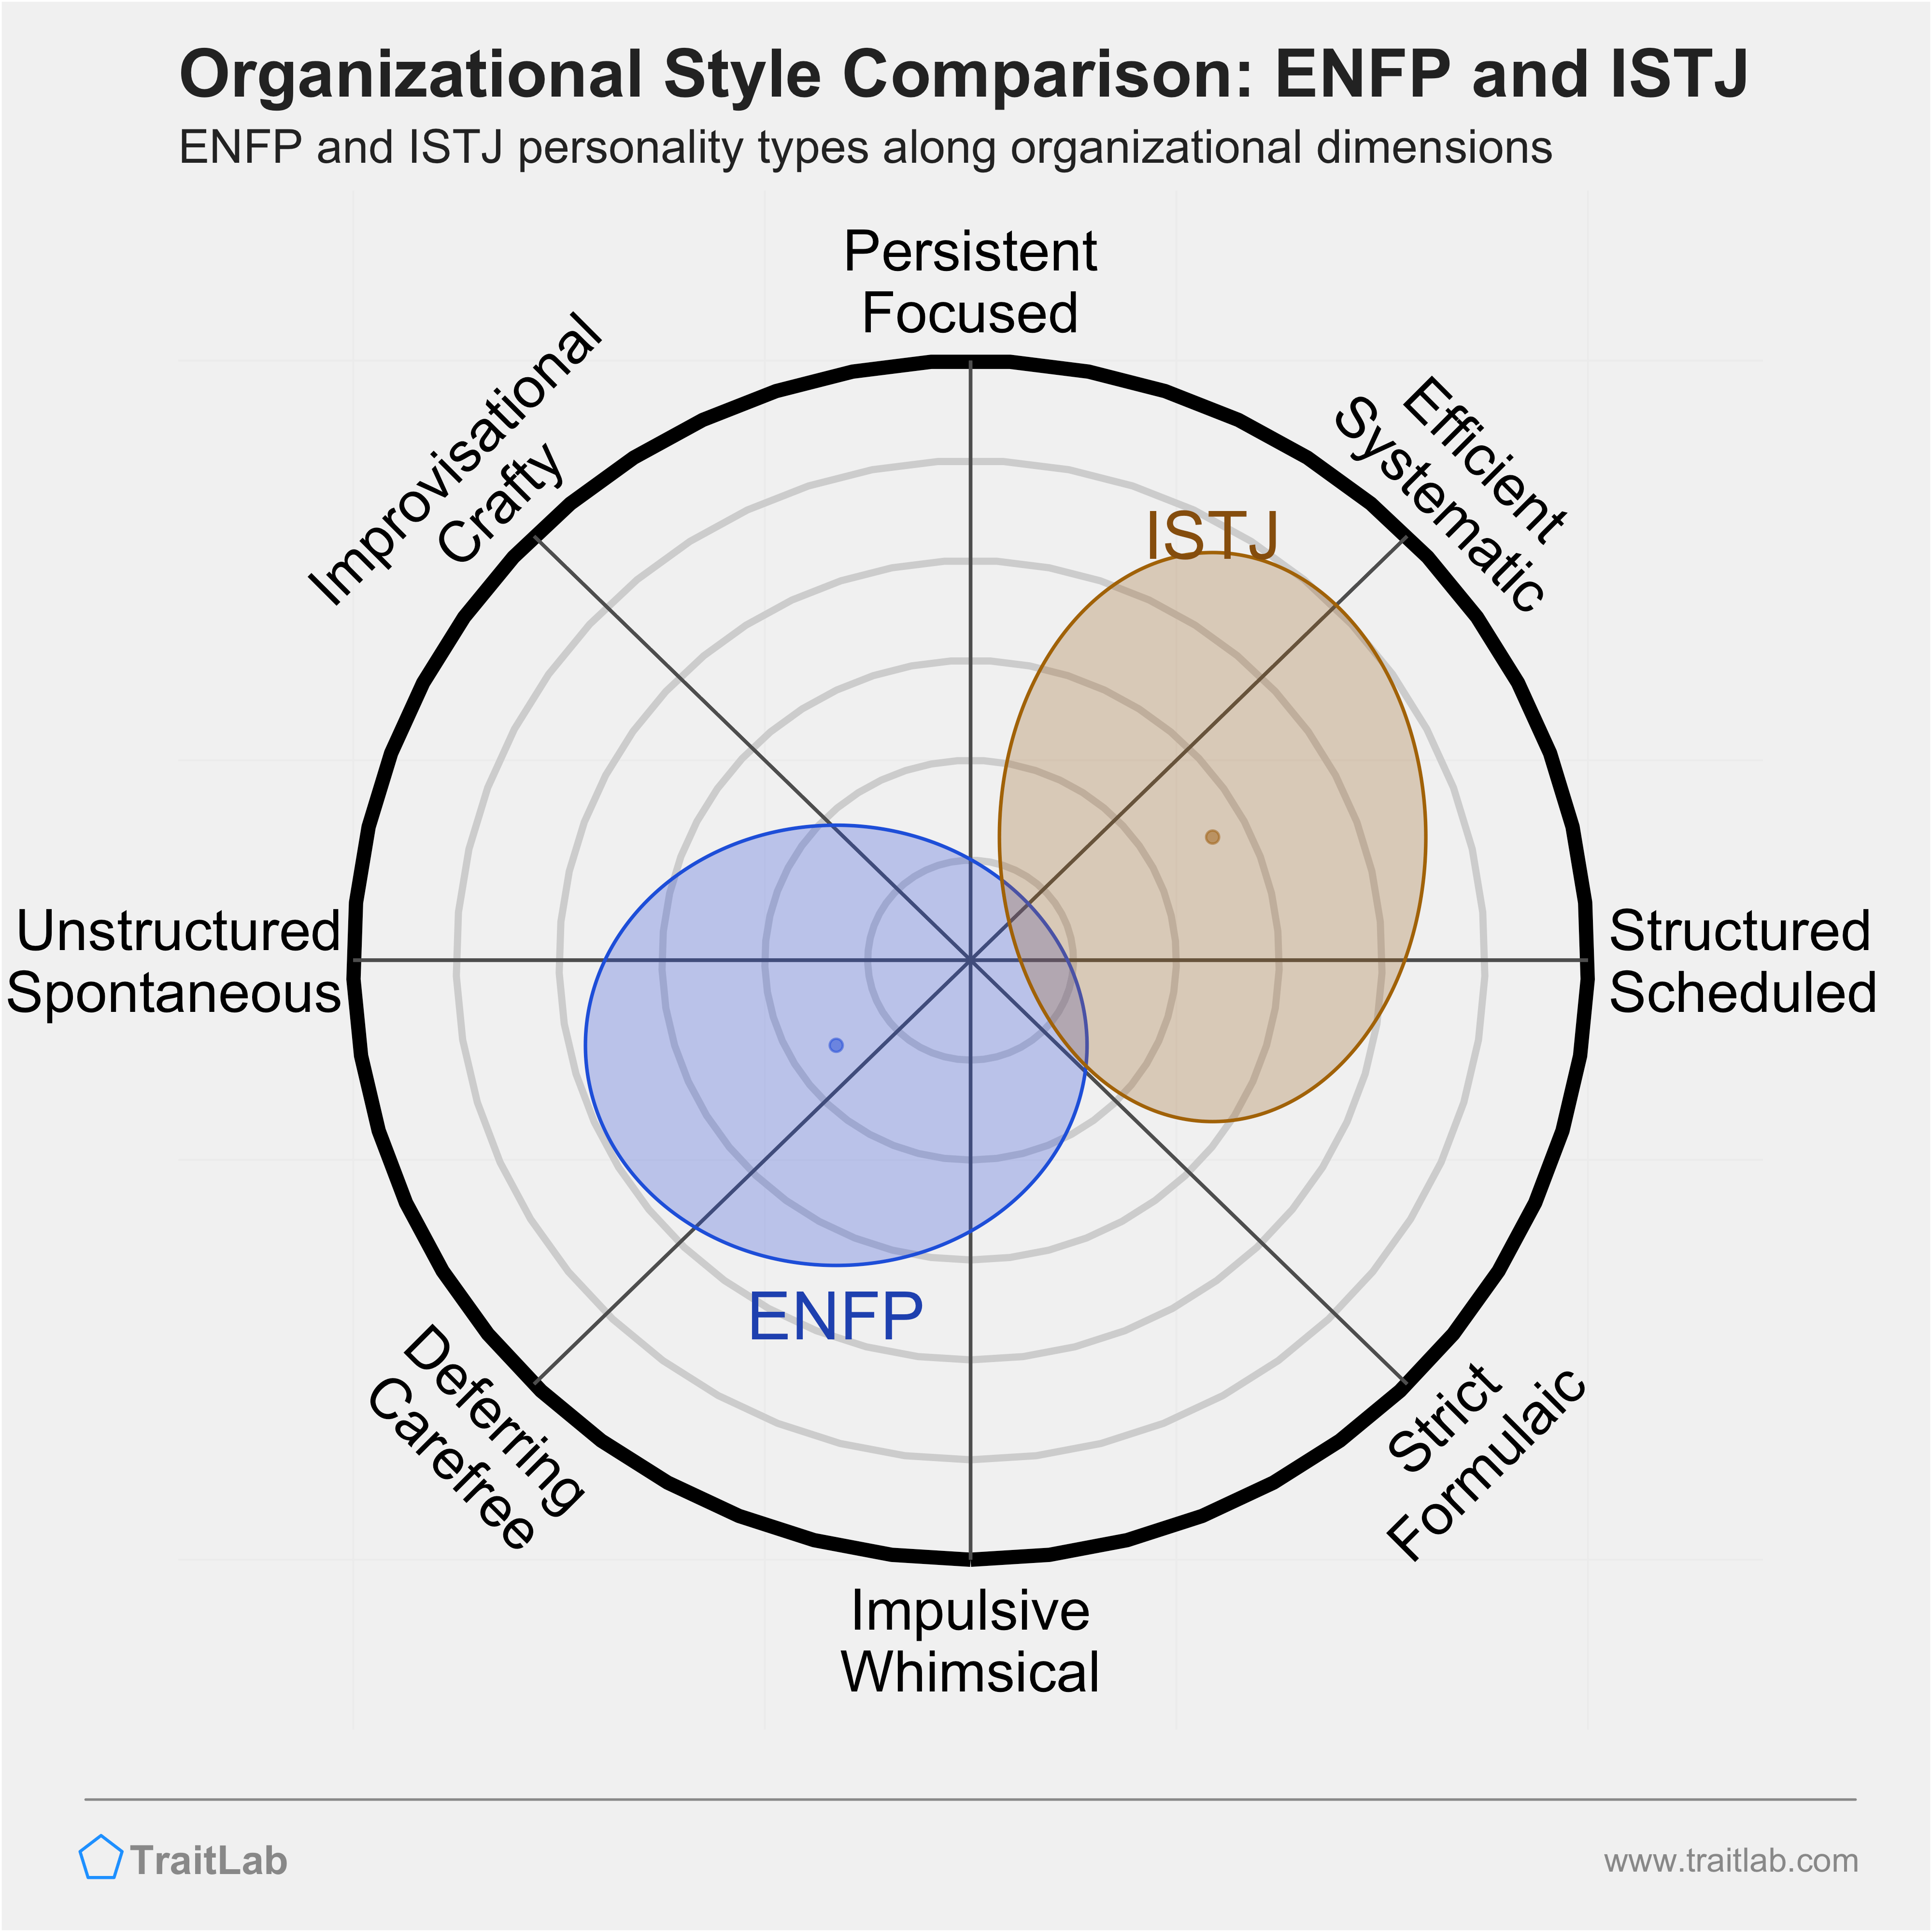 ENFP and ISTJ comparison across organizational dimensions